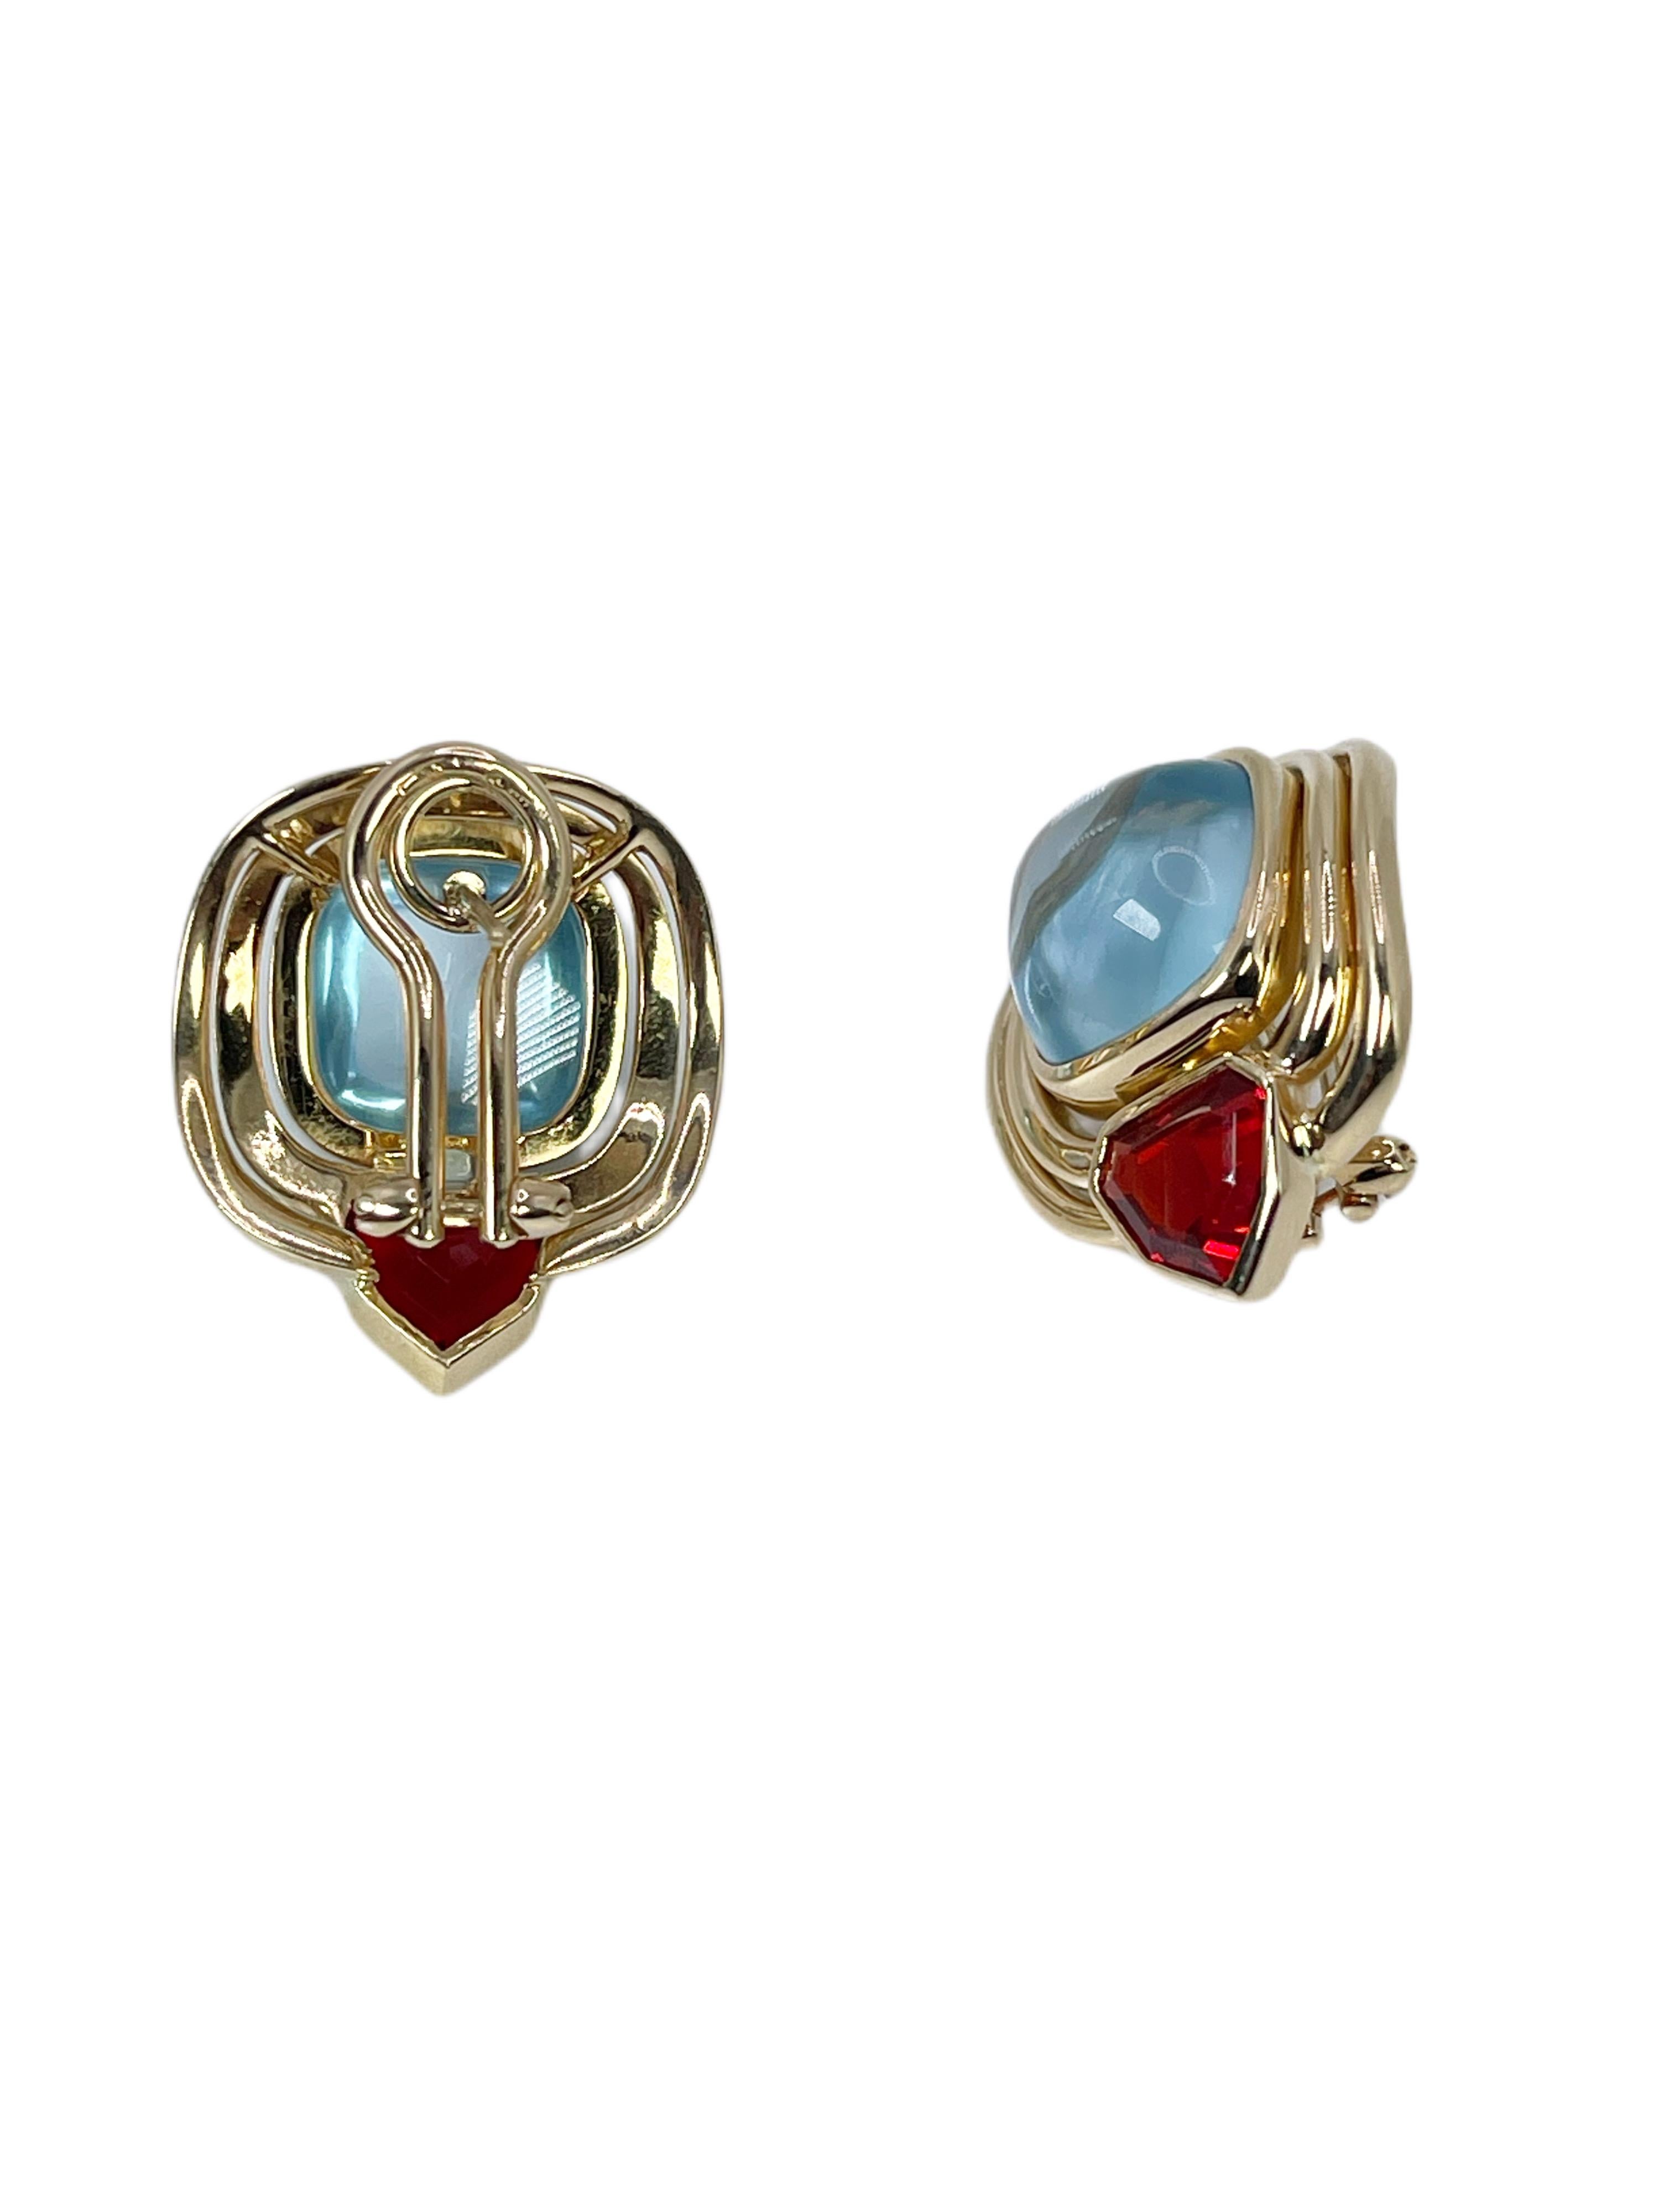 Cabochon Topaz & Opal earrings 18KT yellow gold Vintage clip on omega earrings For Sale